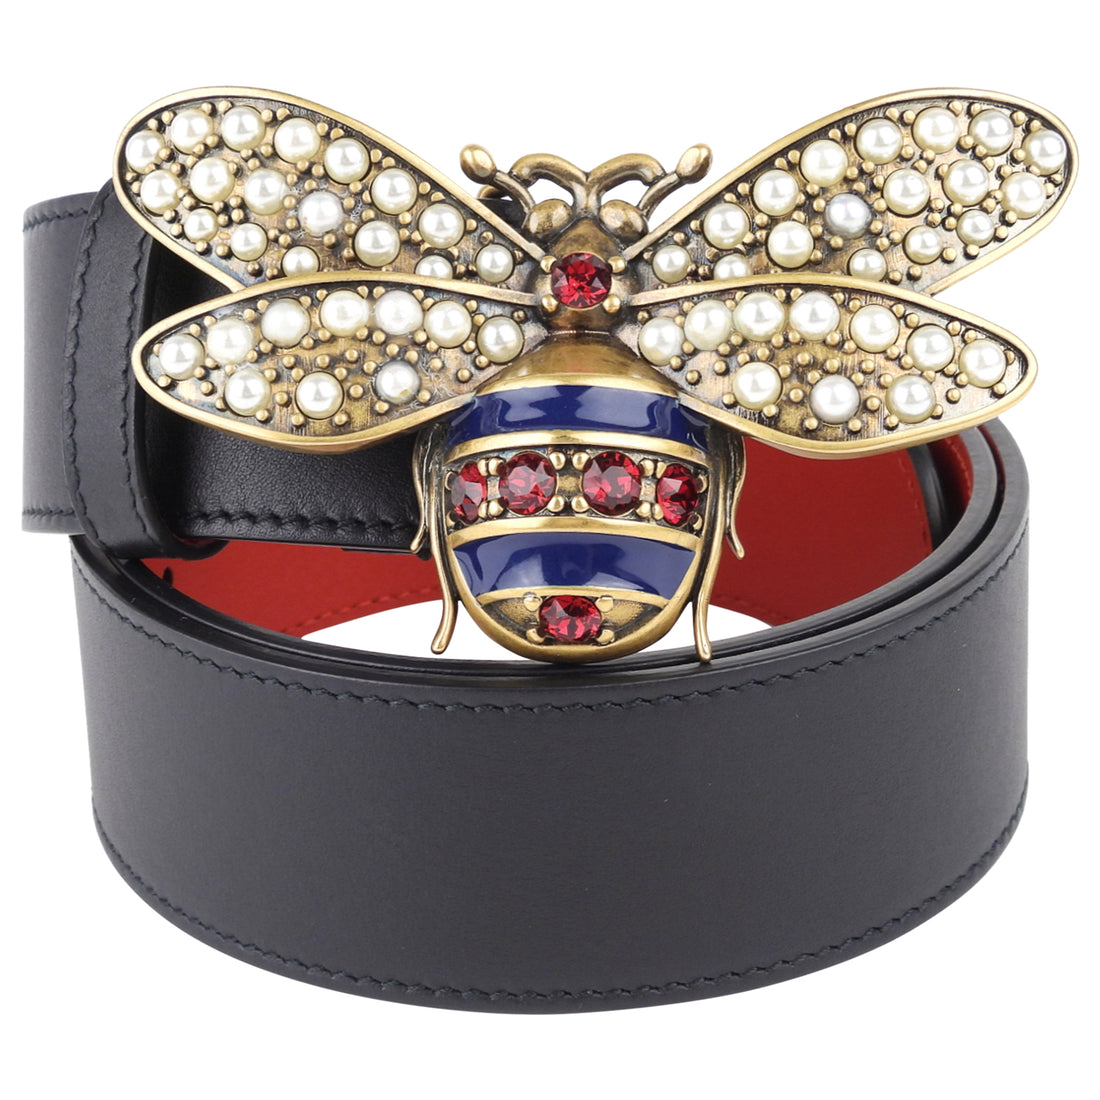 Gucci Black Calf Leather Rhinestone and Pearl Embellished Queen Margaret Bee Buckle Belt - 85 / 34